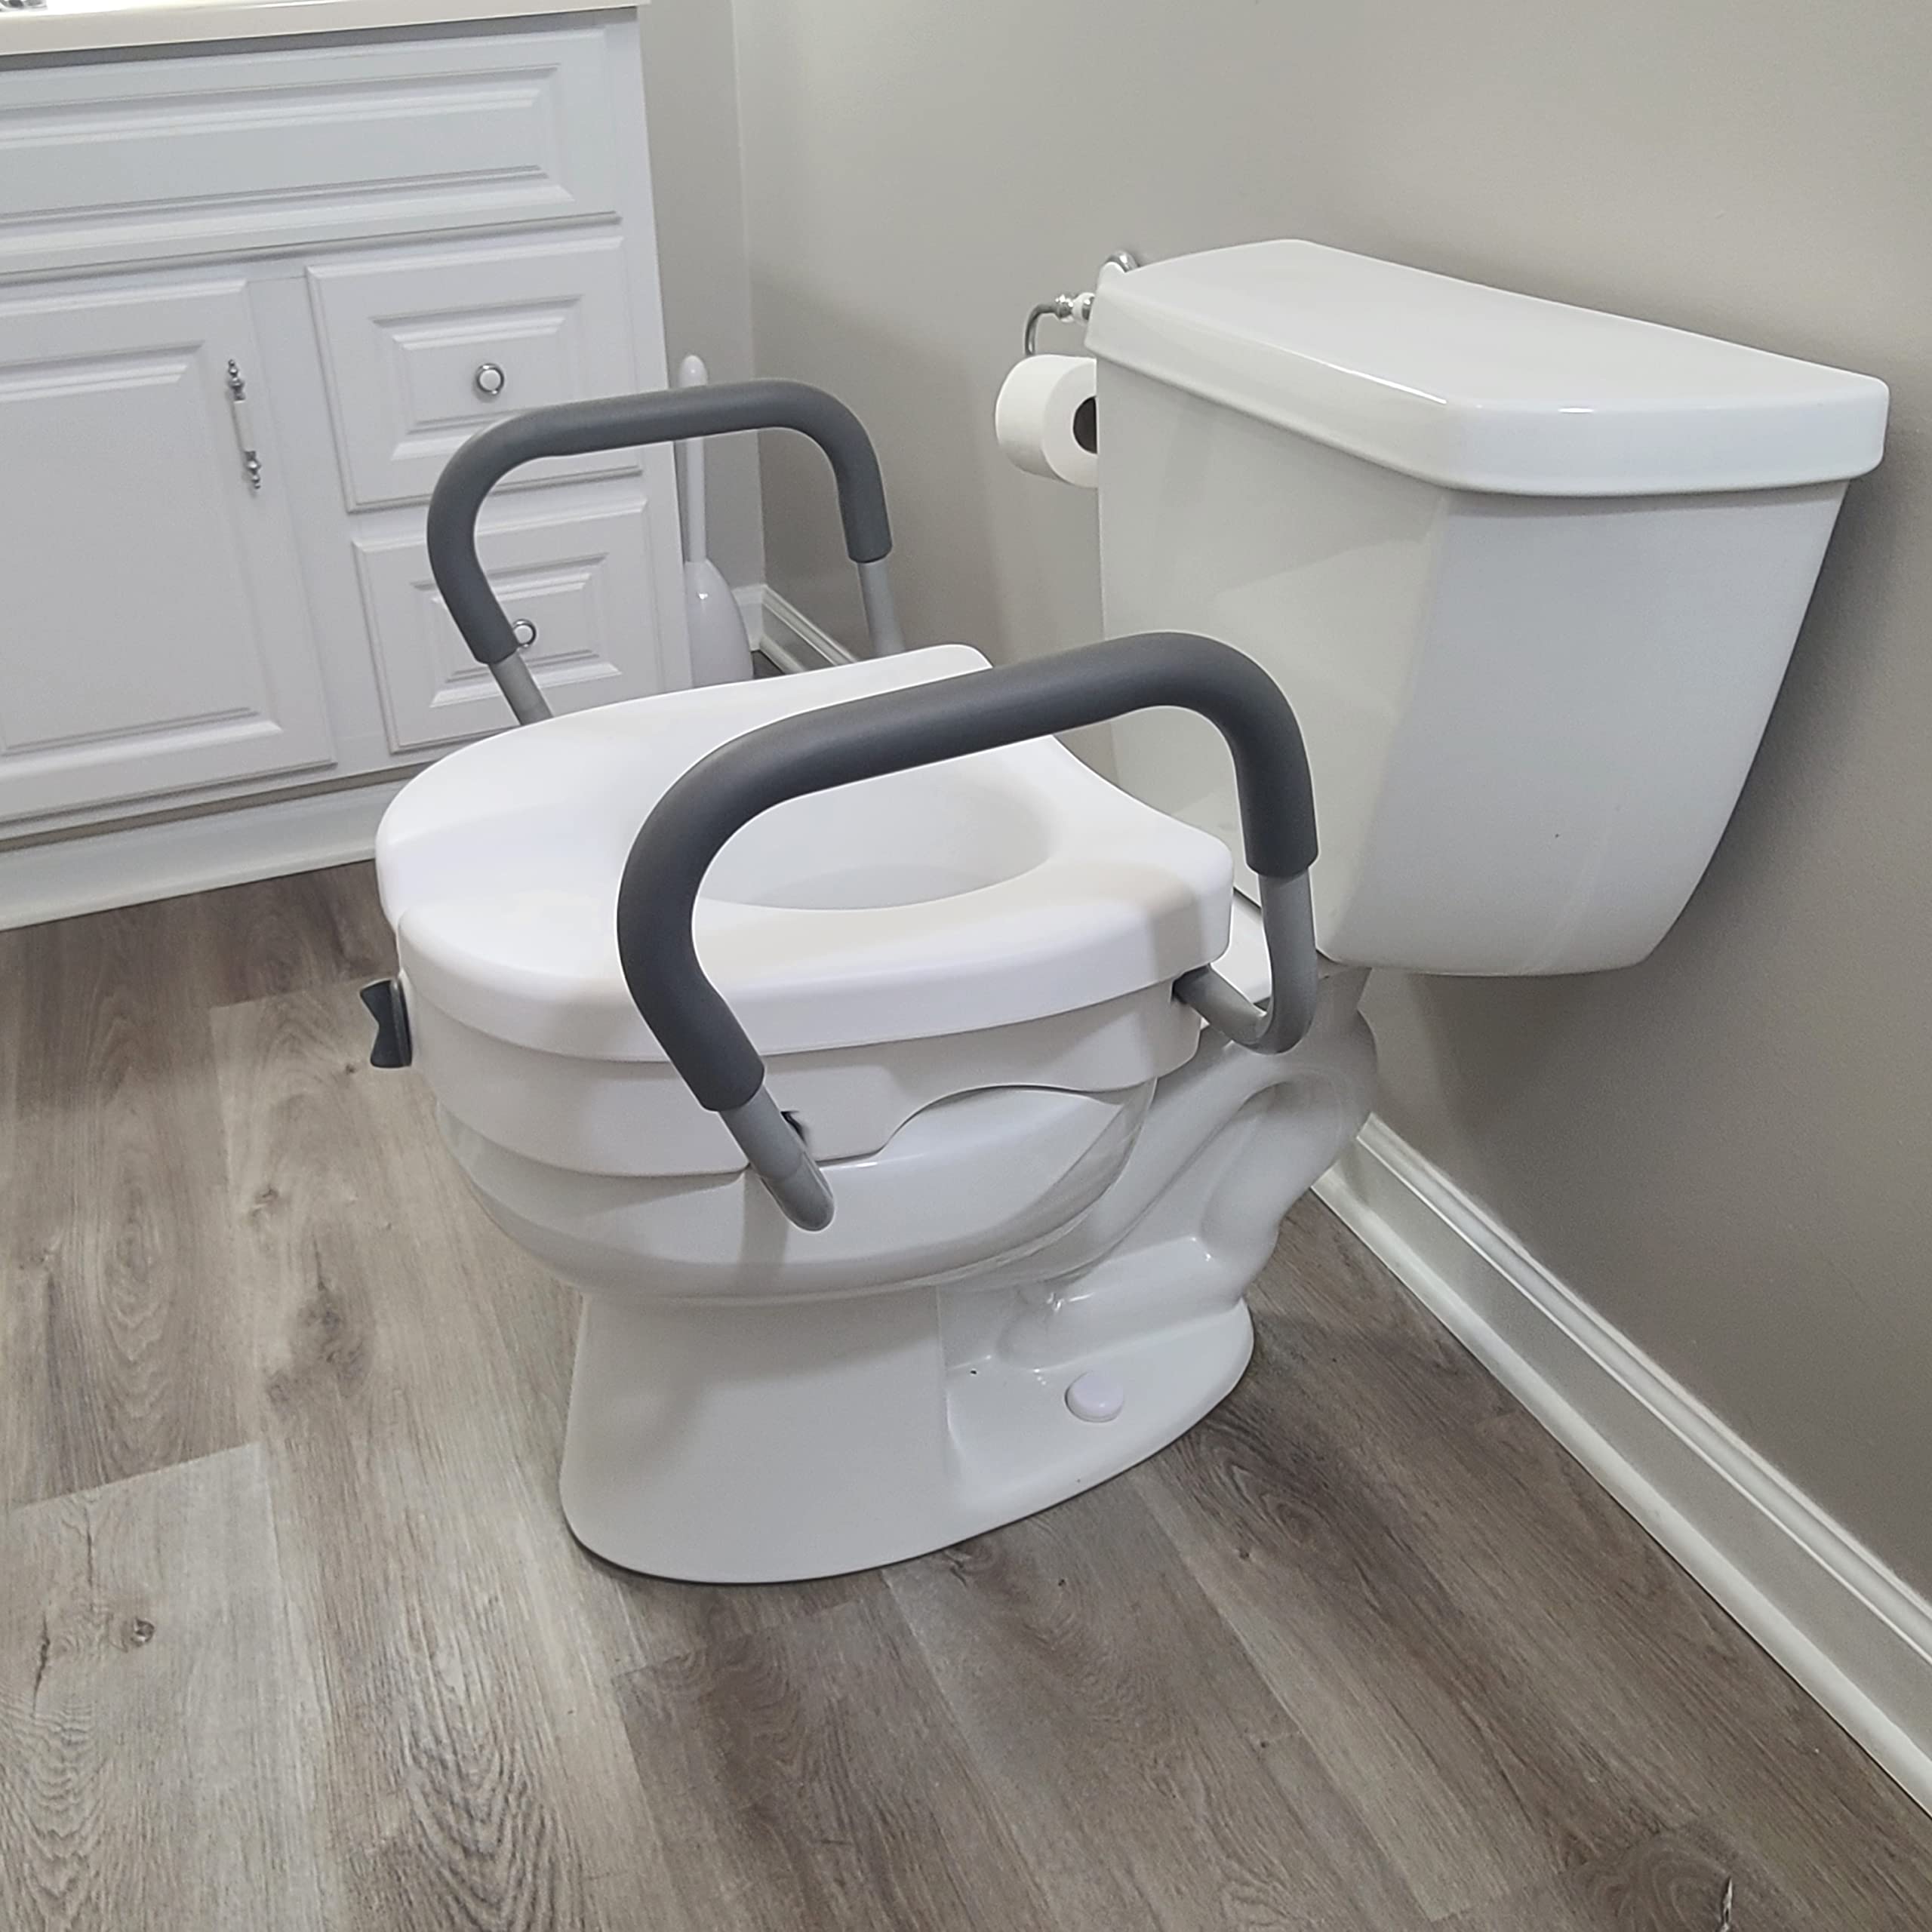 Carex EZ Lock Raised Toilet Seat with Handles, 5 Inch Elevated Handicap Toilet Seat Riser with Arms, Fits Most Toilets